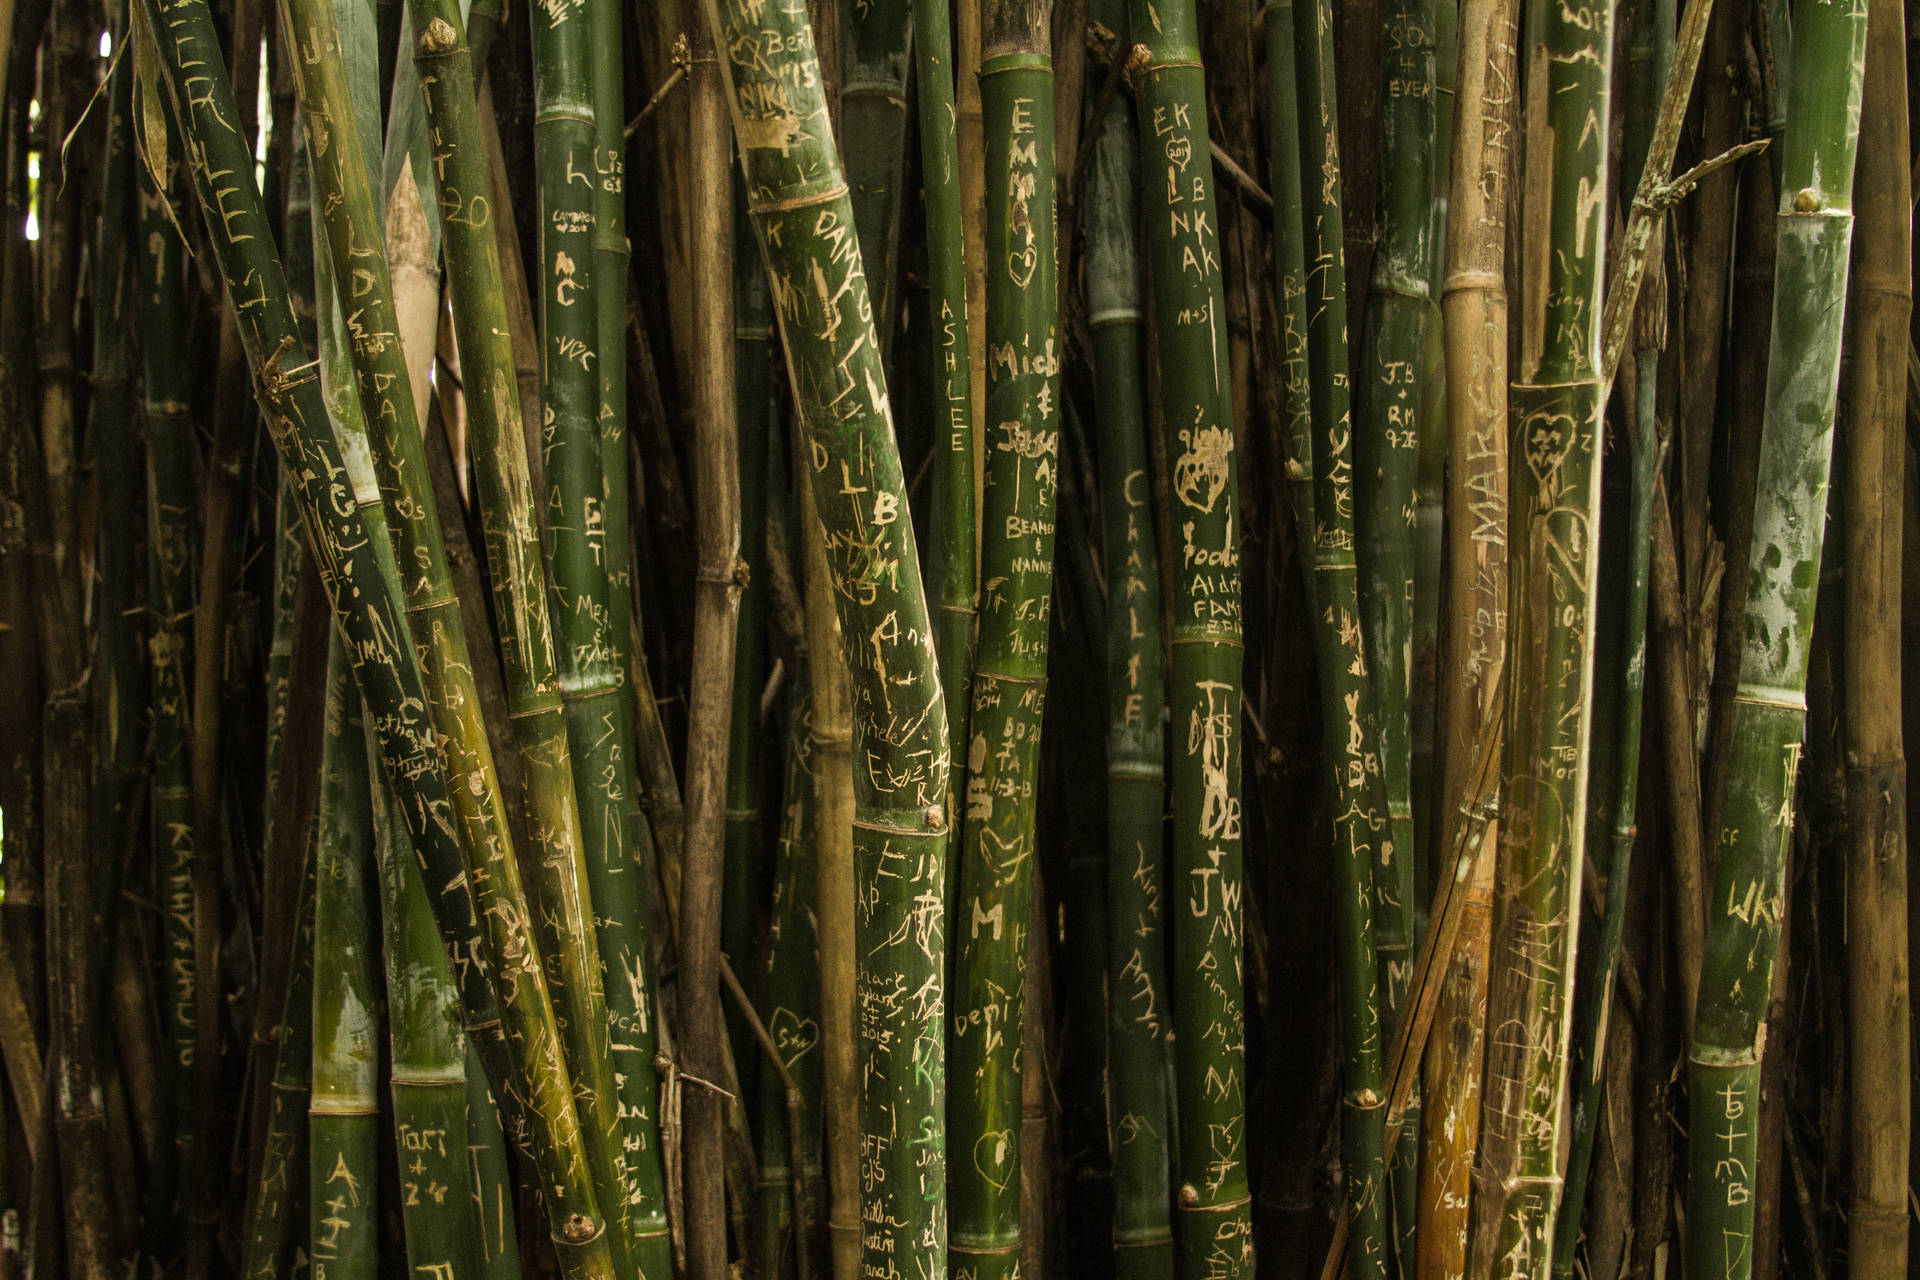 Bamboo Poles With Engravings Background